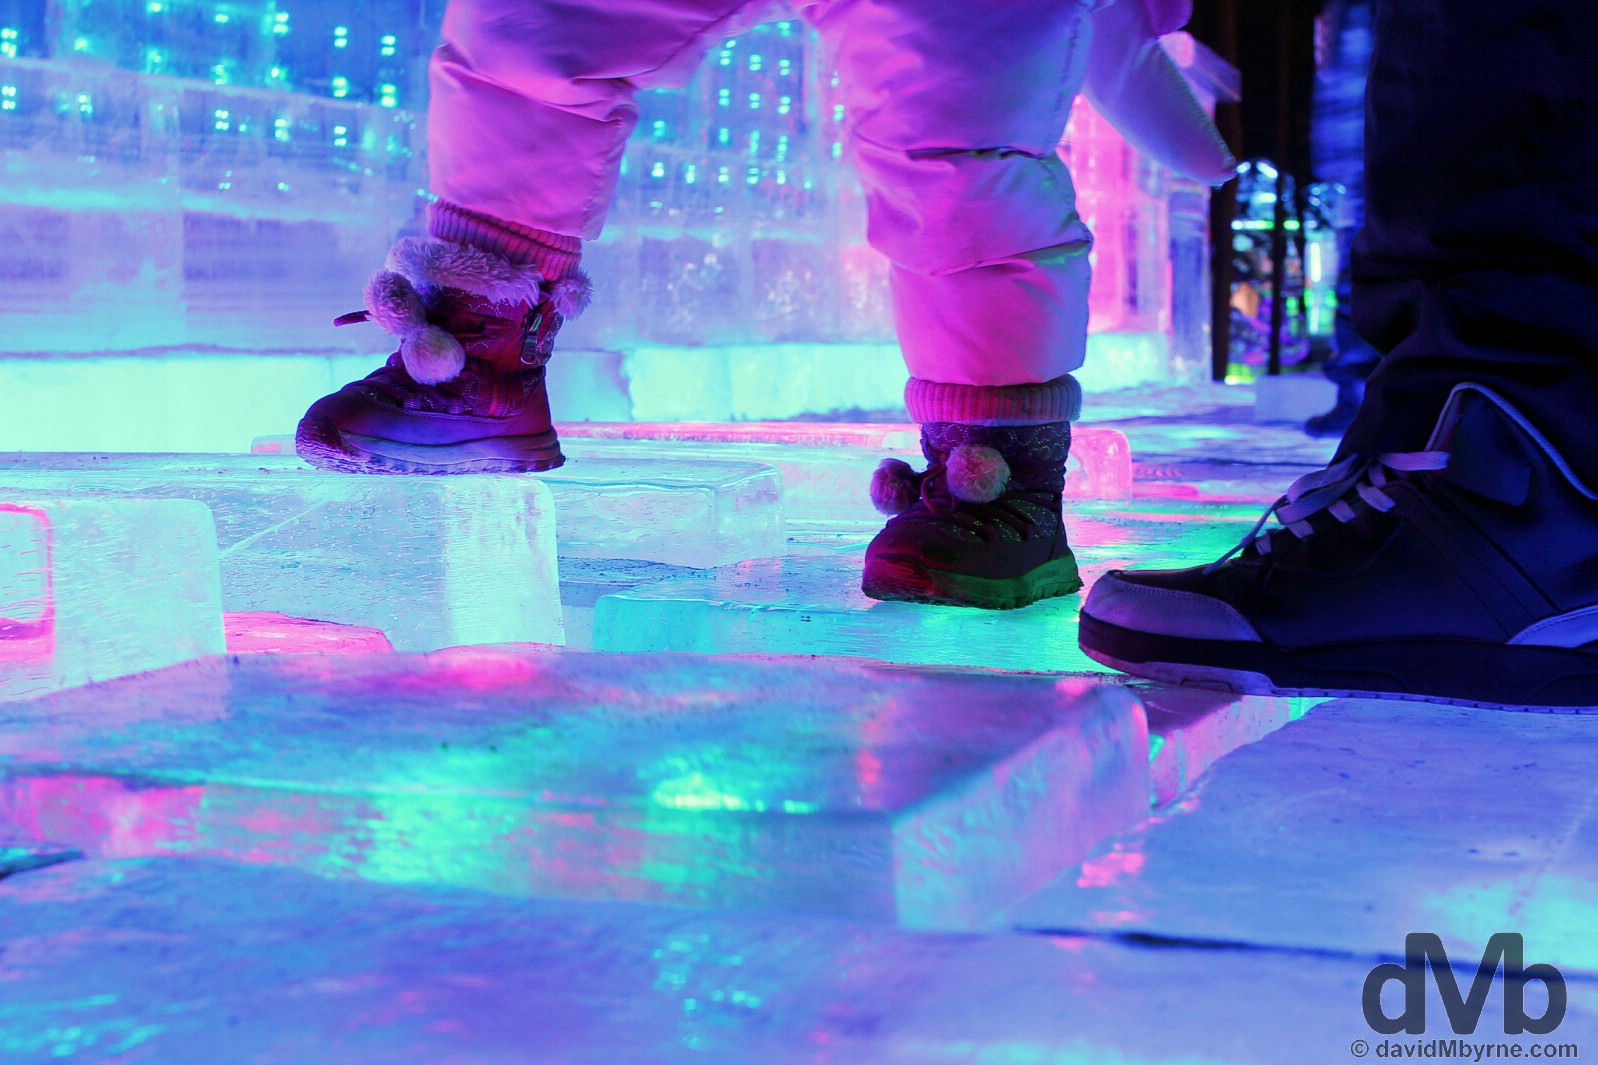 Little & not so little feet on the ice piano in Zhaolin Park as part of the annual International Ice and Snow Sculpture Festival in Harbin, China. February 6, 2015.